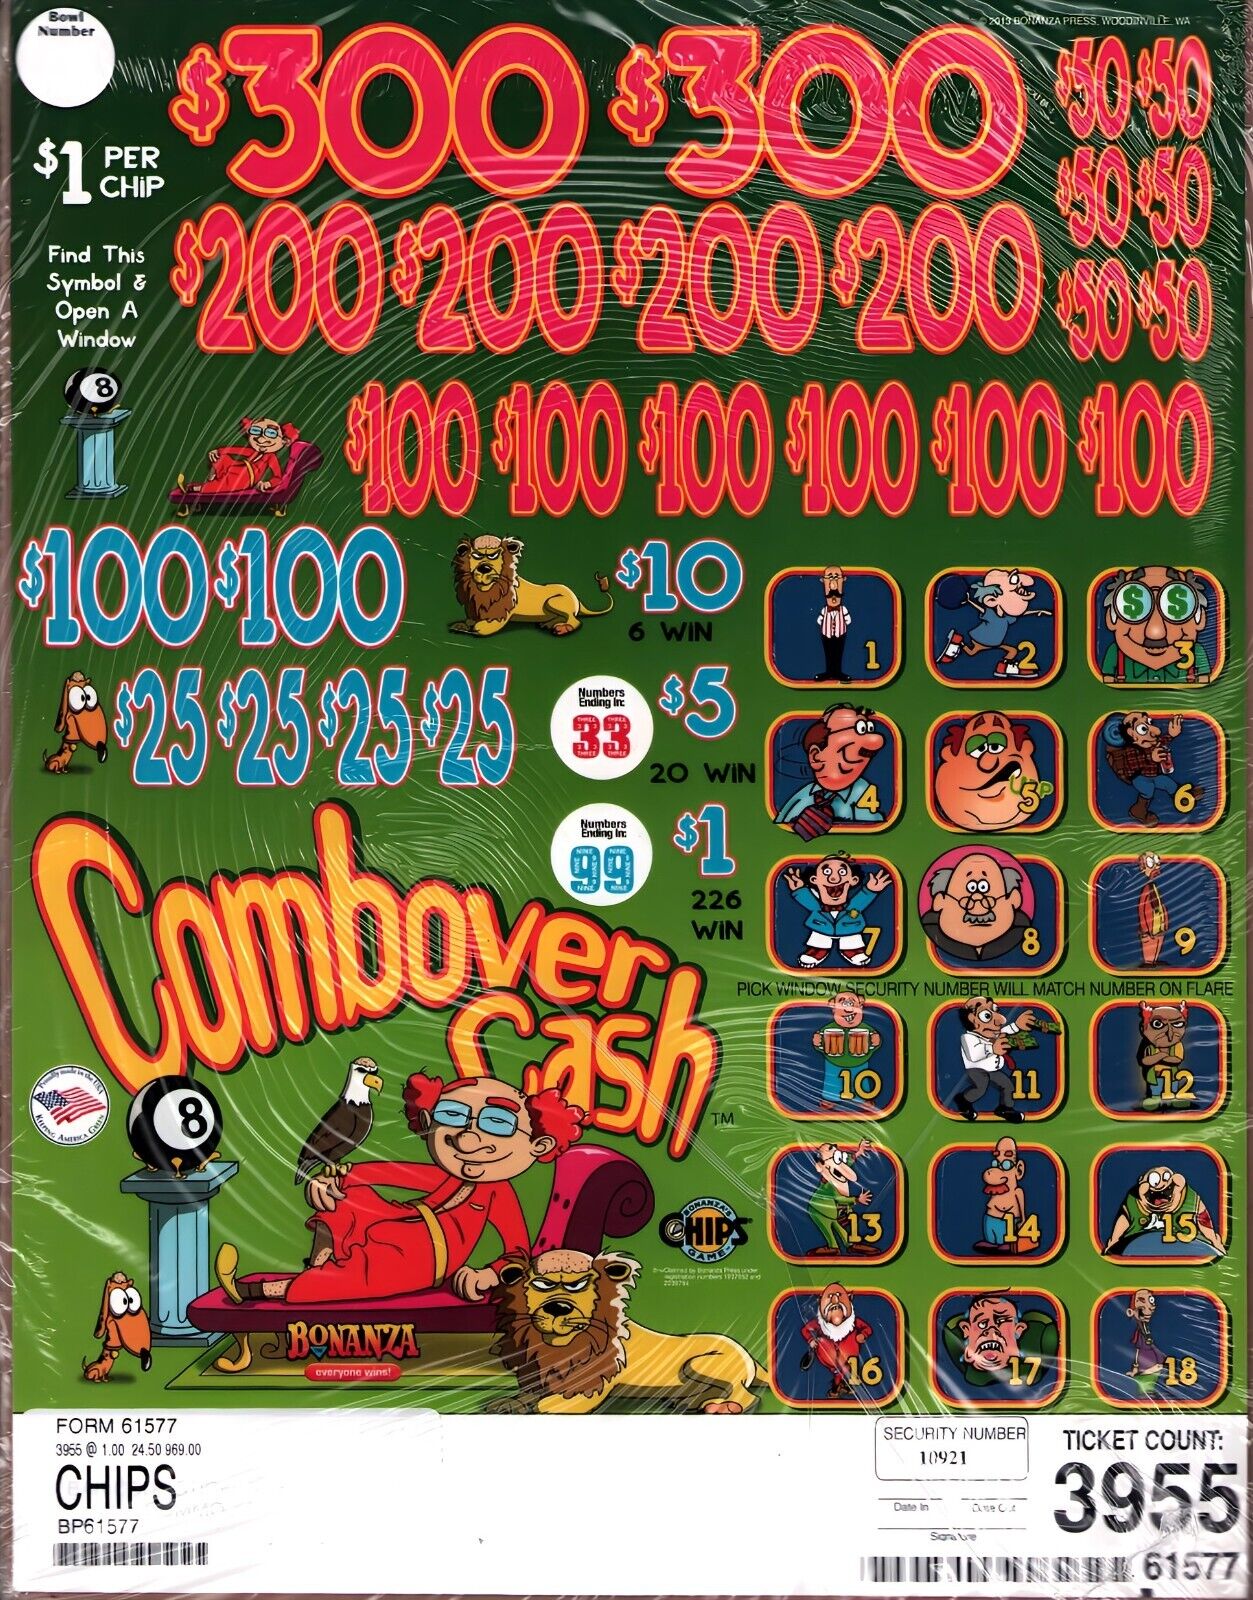 New Pull Tickets - Chip Tickets - Combover Cash